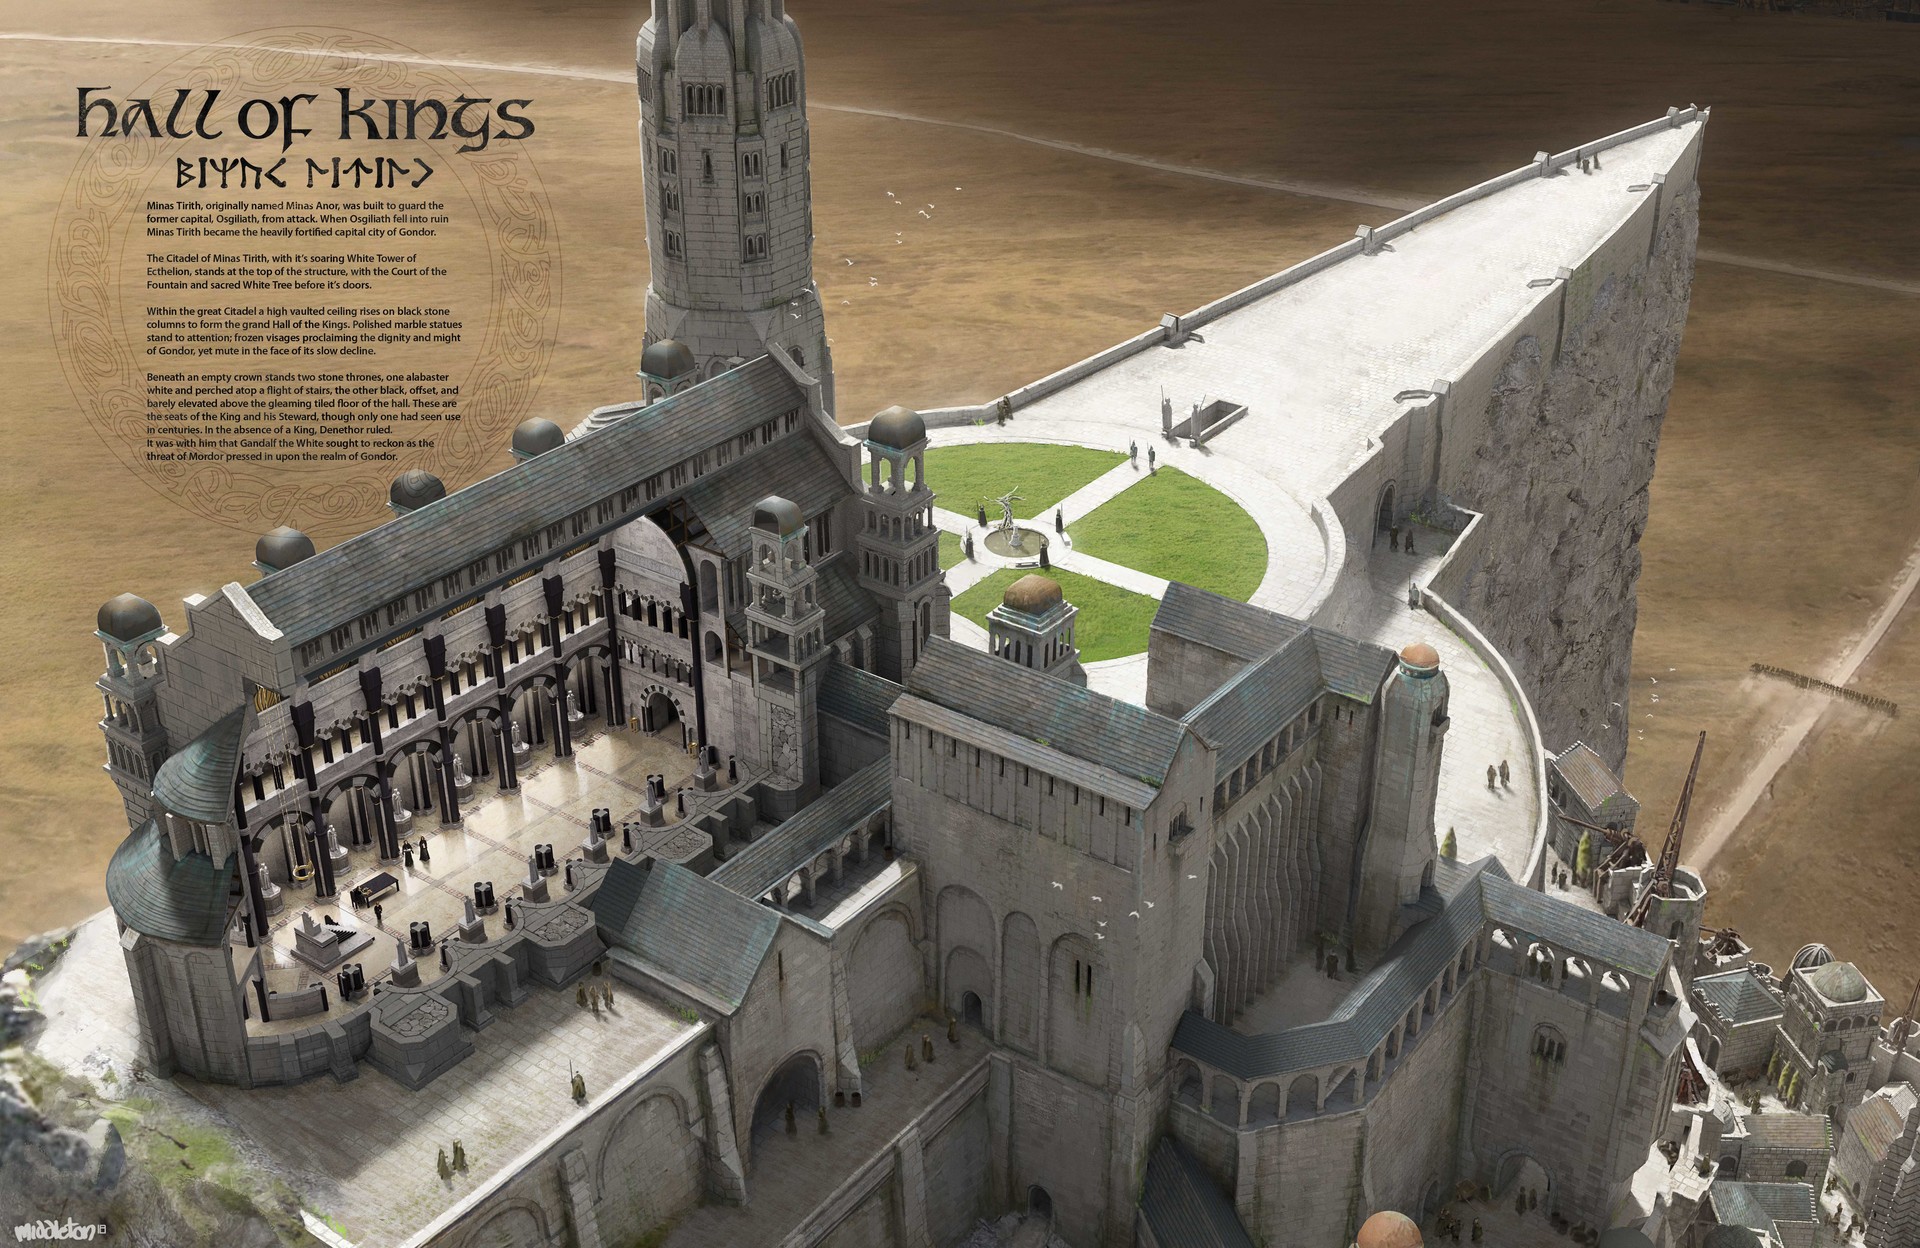 The Lord Of The Rings Minas Tirith Gondor Capital Environmental Statue  Castle